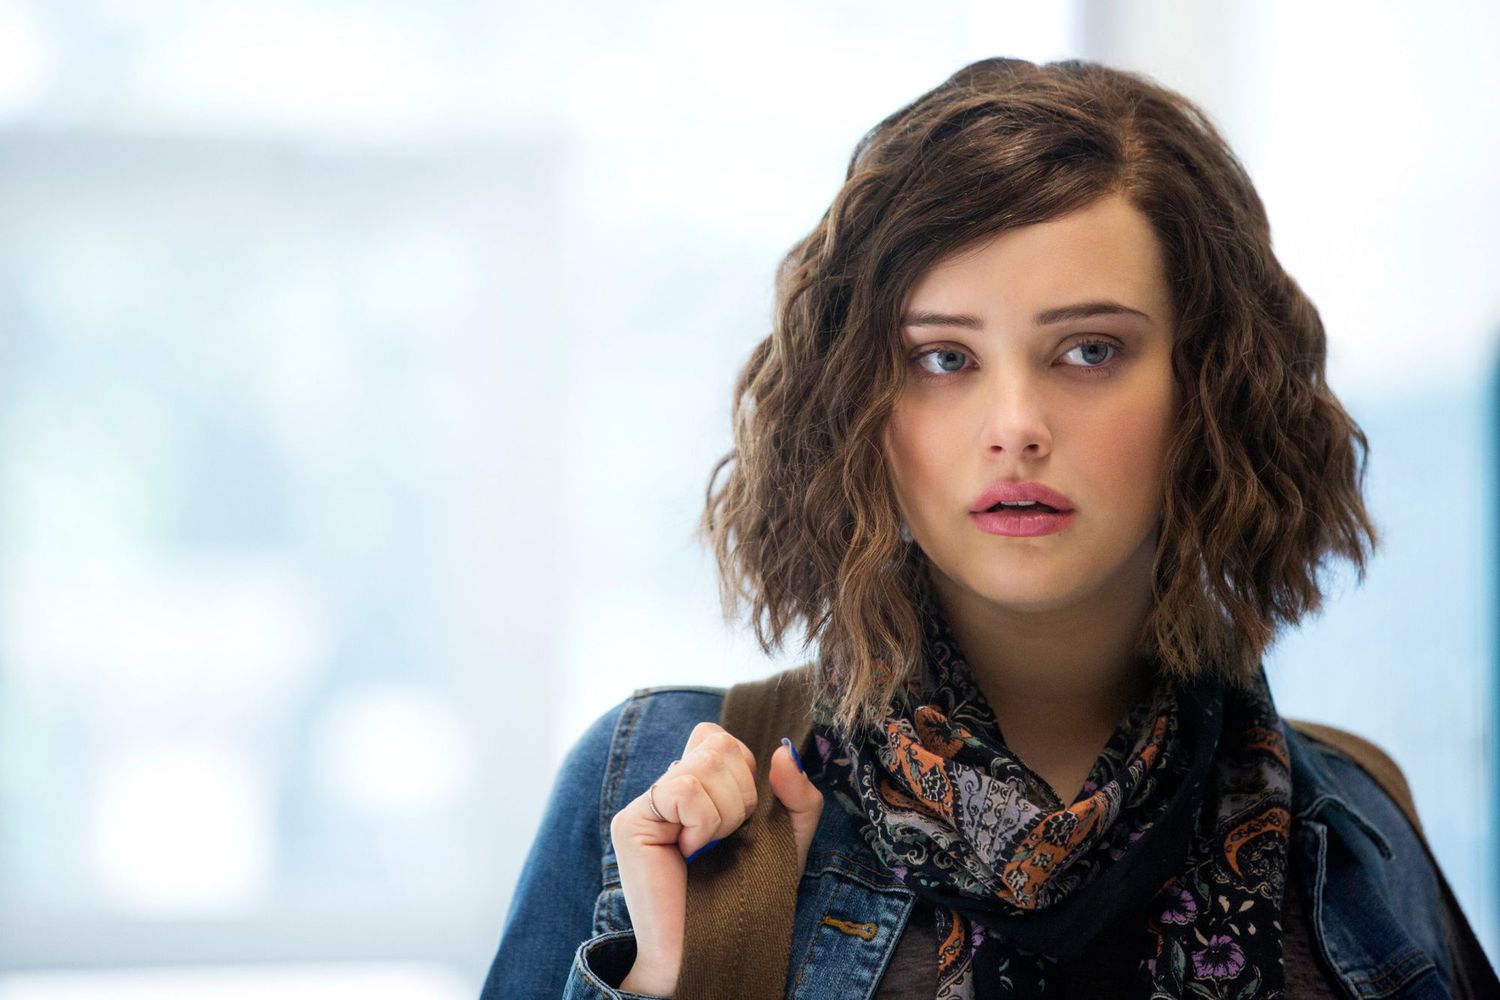 13 Reasons Why: Netflix alters Hannah's graphic suicide scene from season 1  | EW.com